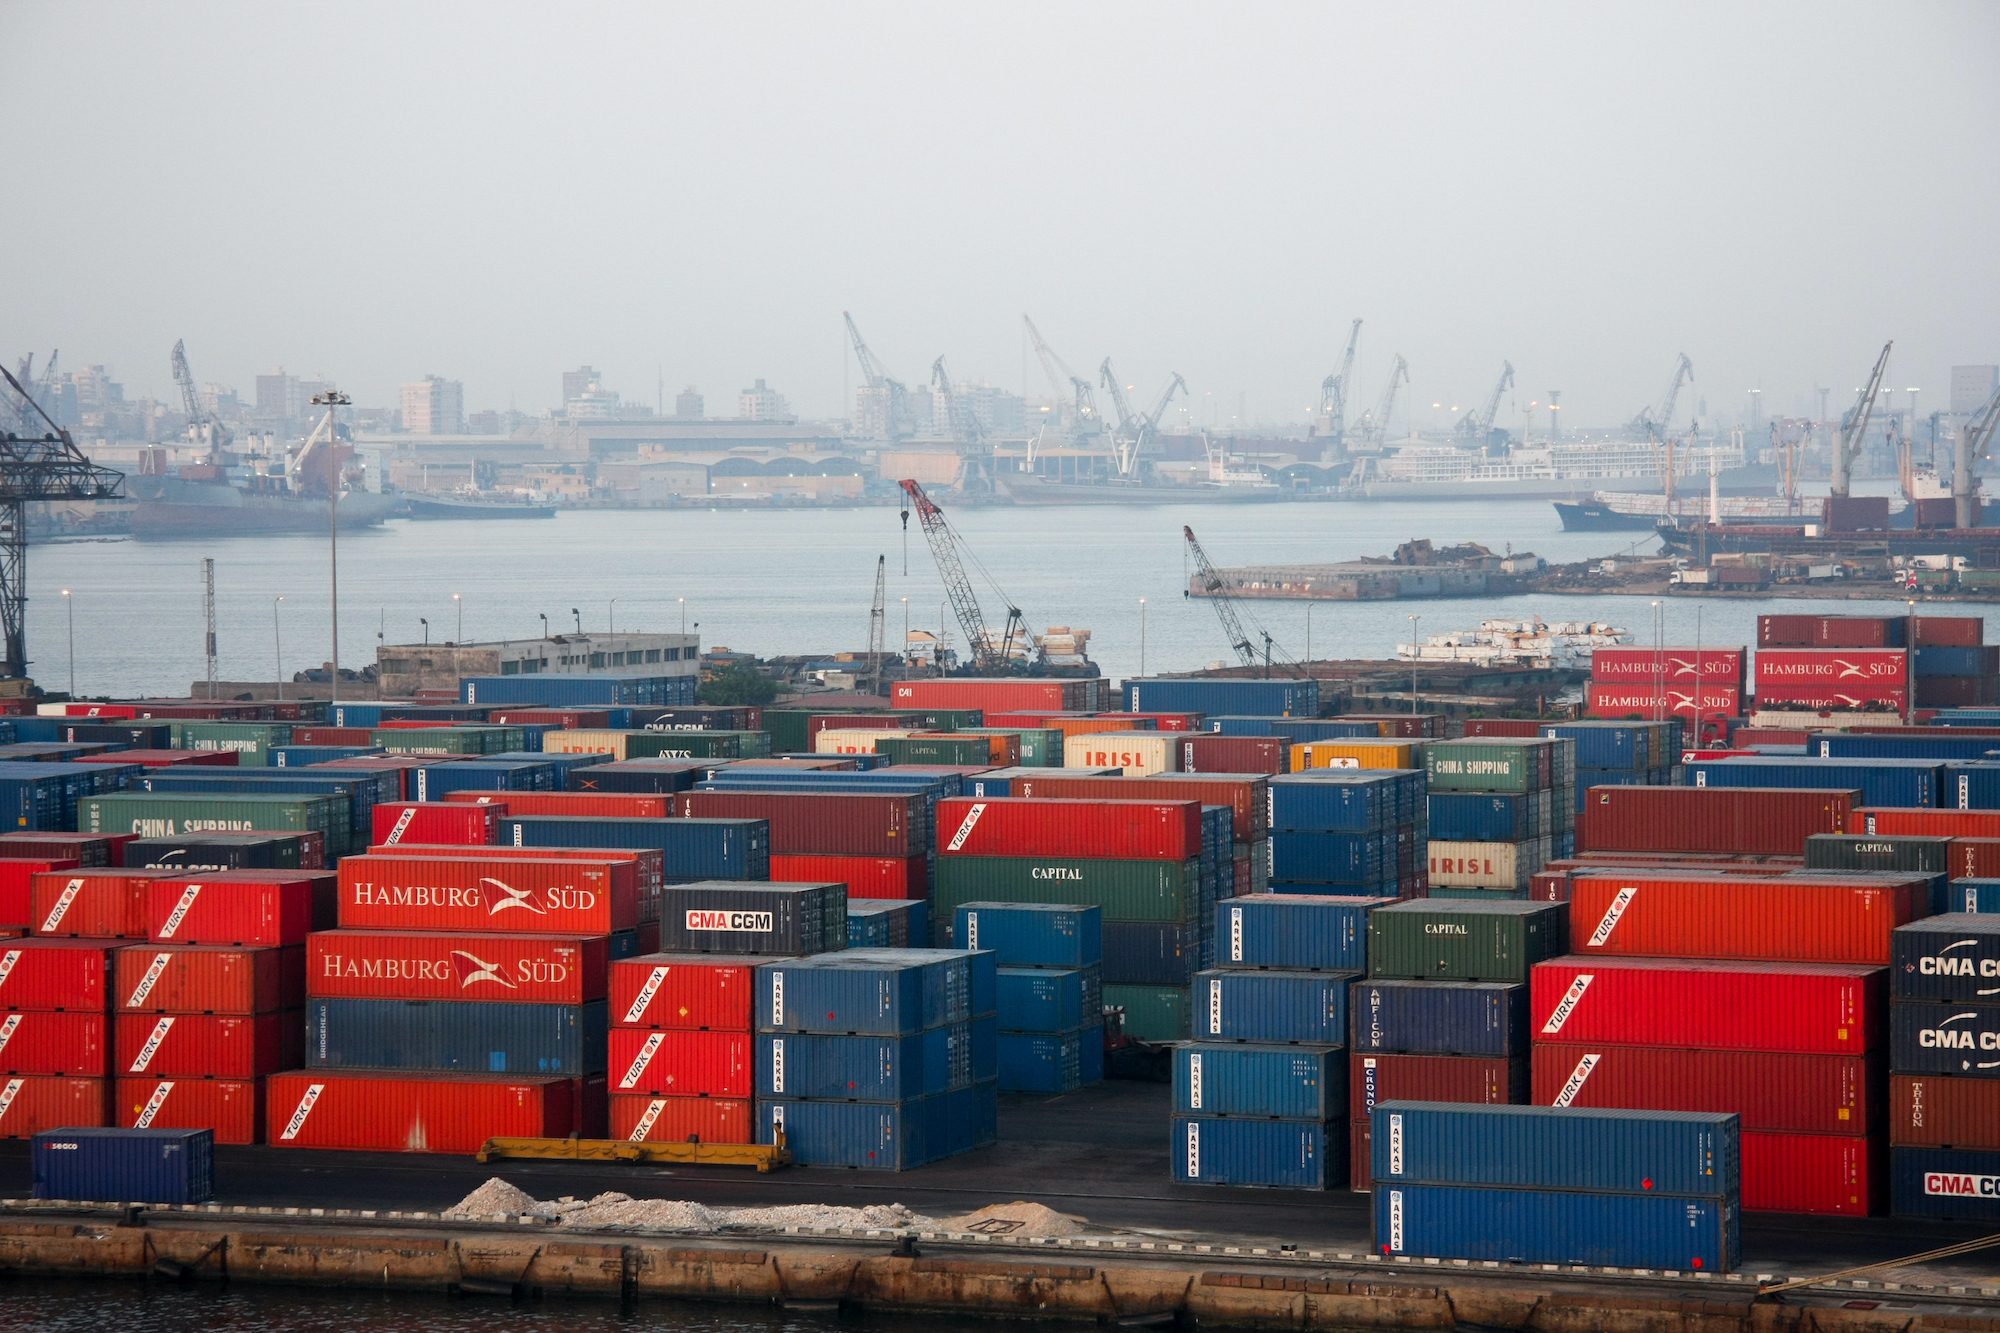 Egypt Introduces Measures to Help Clear Backed Up Ports